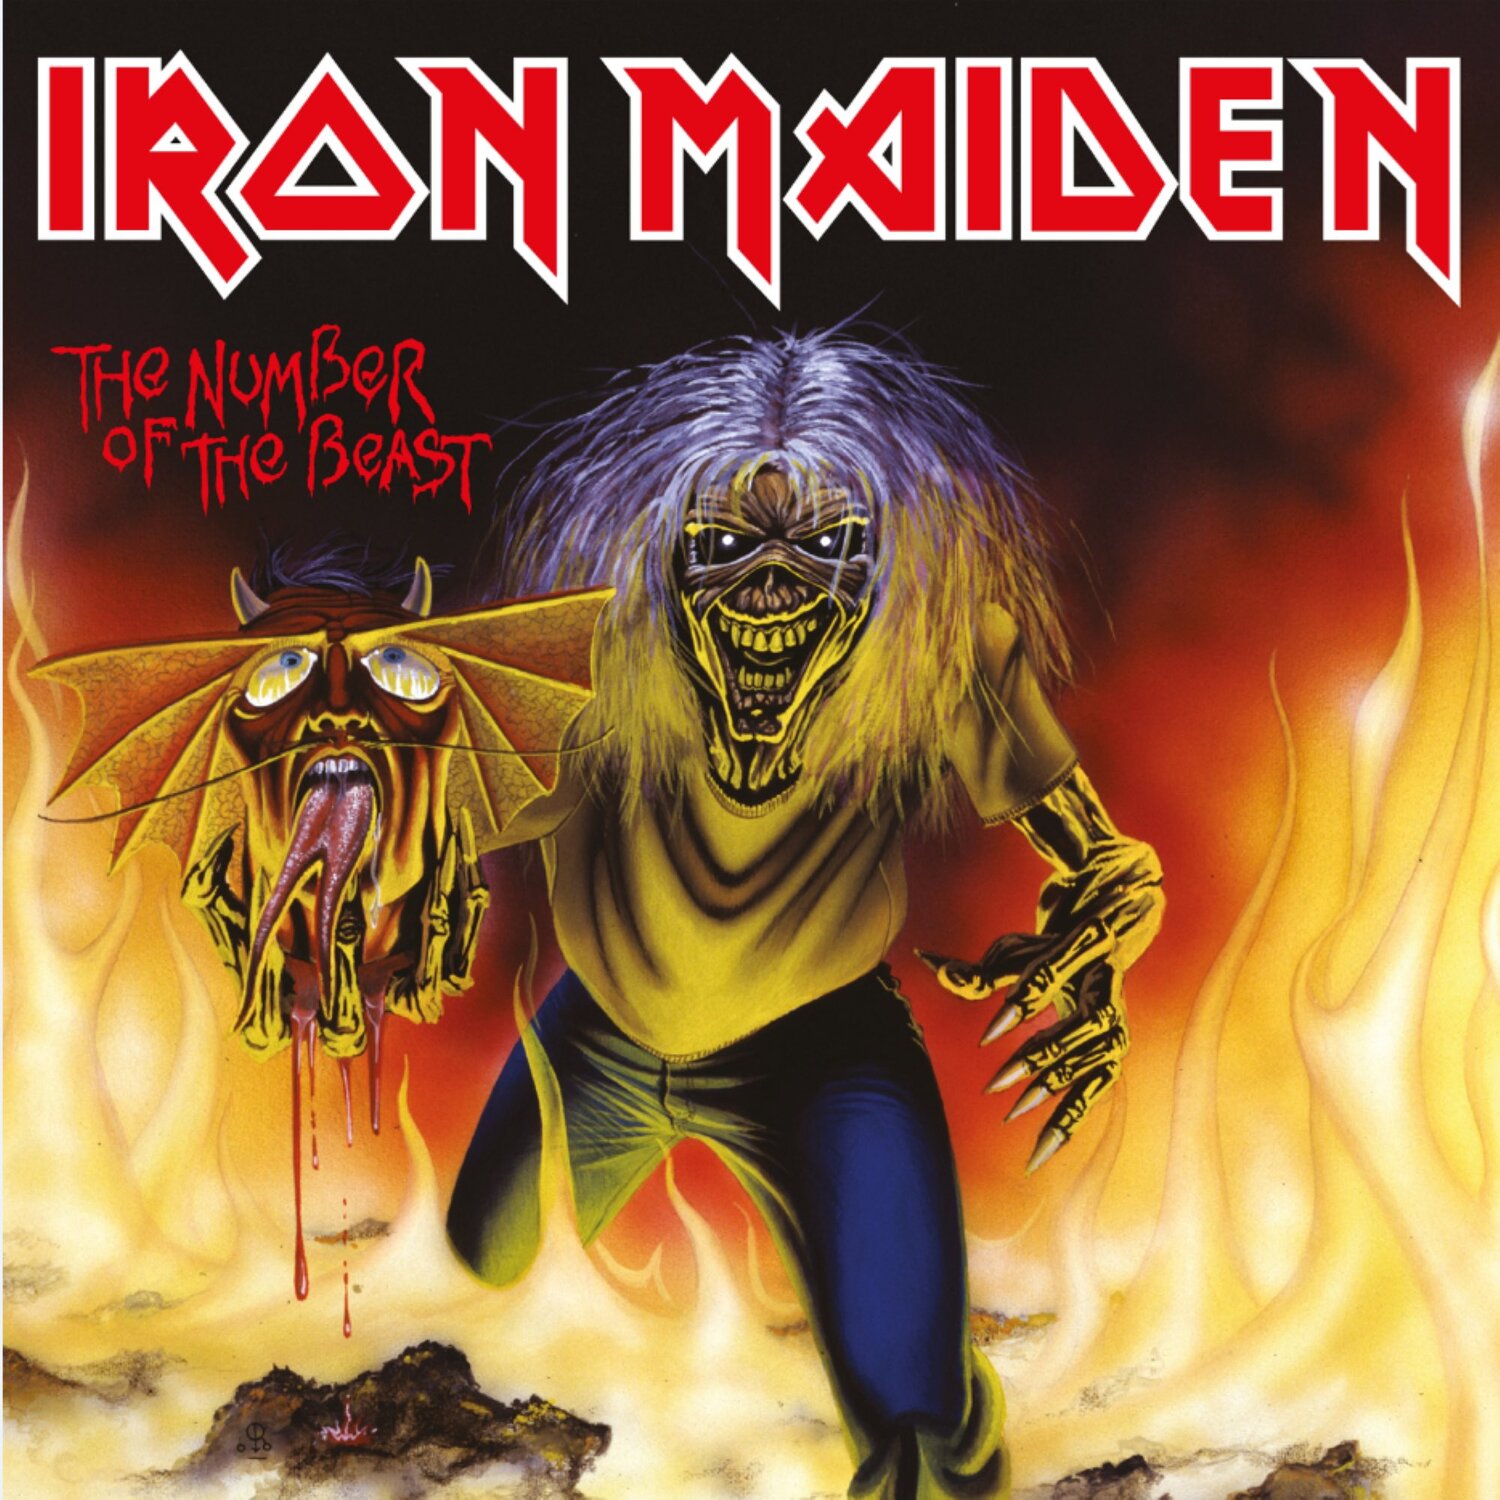 Iron Maiden — The Number of the Beast cover artwork